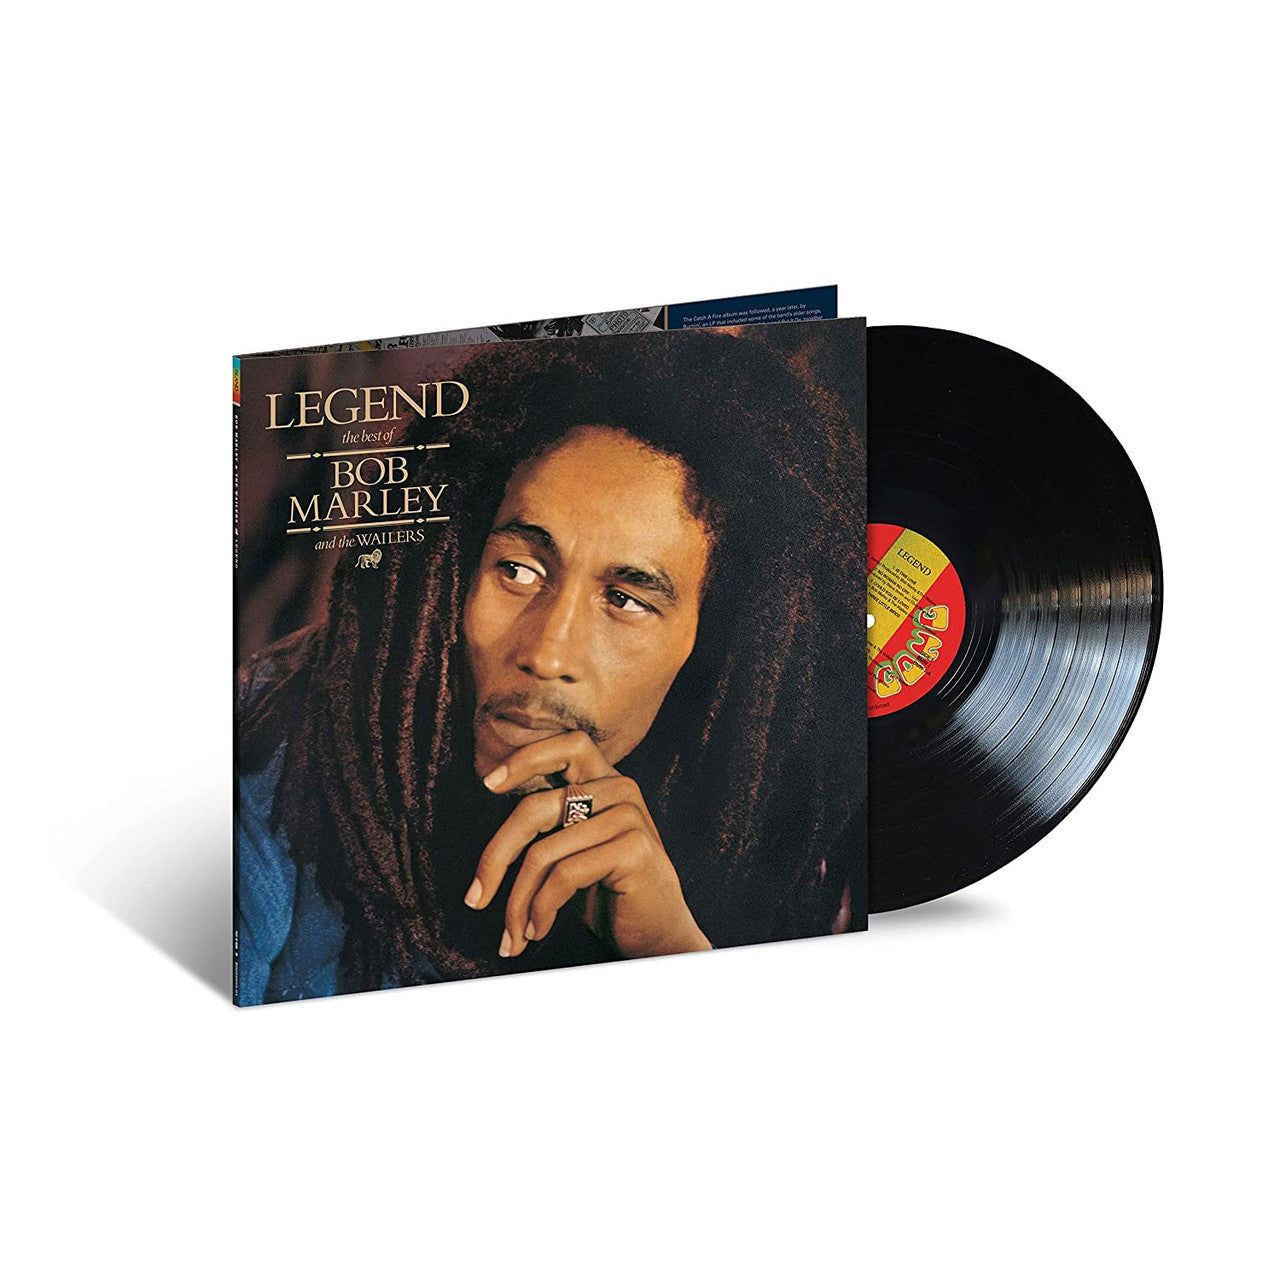 Order Bob Marley & the Wailers - Legend (Limited Edition, Jamaican Reissue Vinyl)